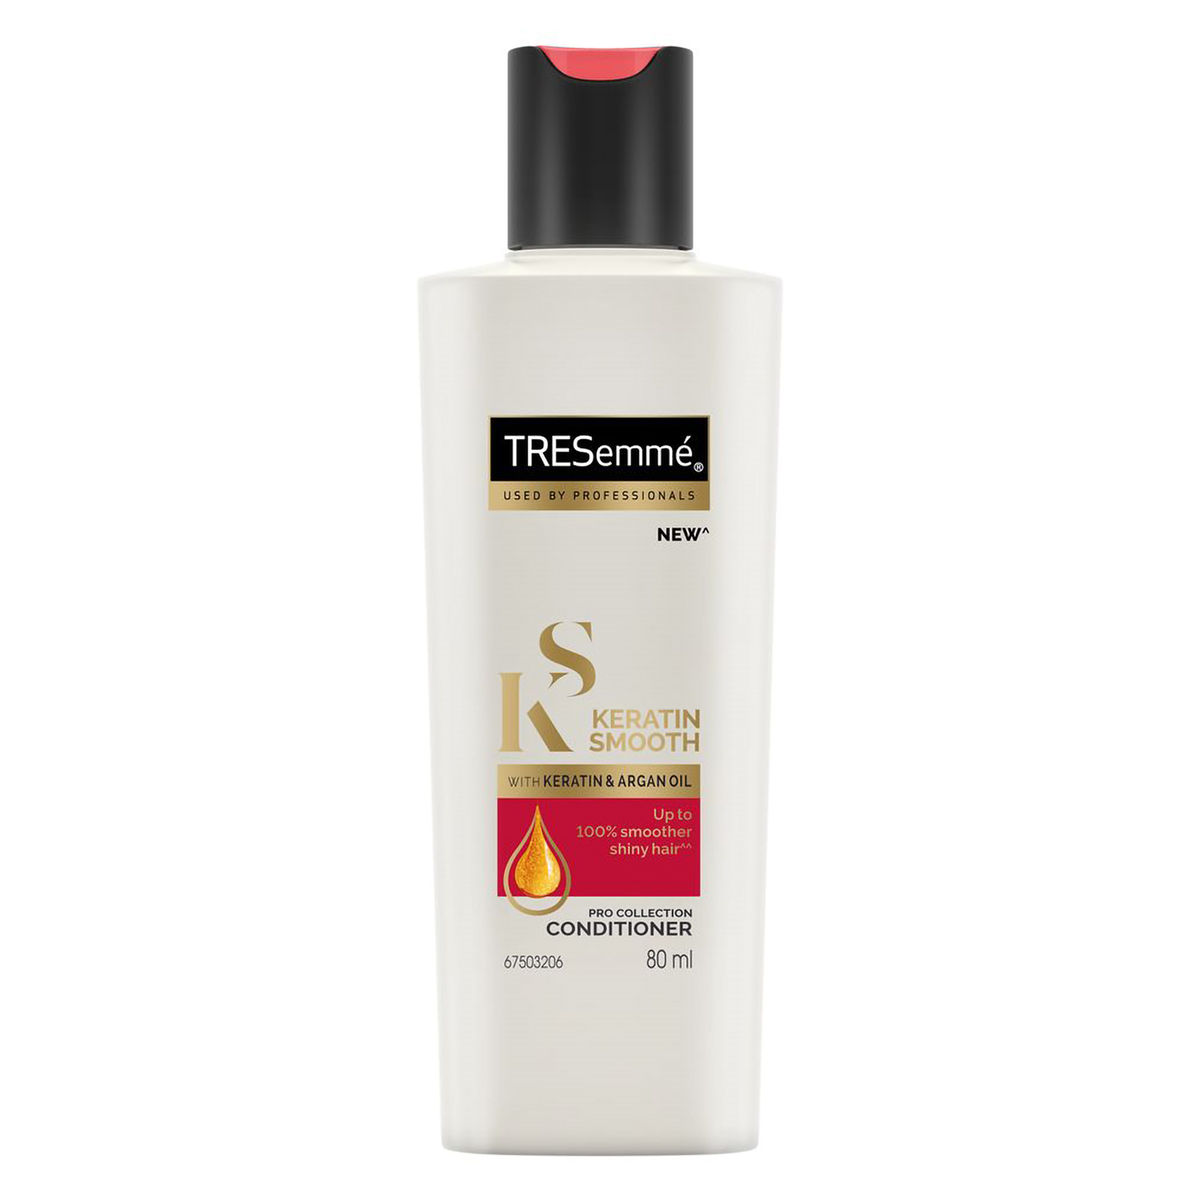 Buy Tresemme Keratin Smooth Conditioner with Argan Oil, 80 ml Online